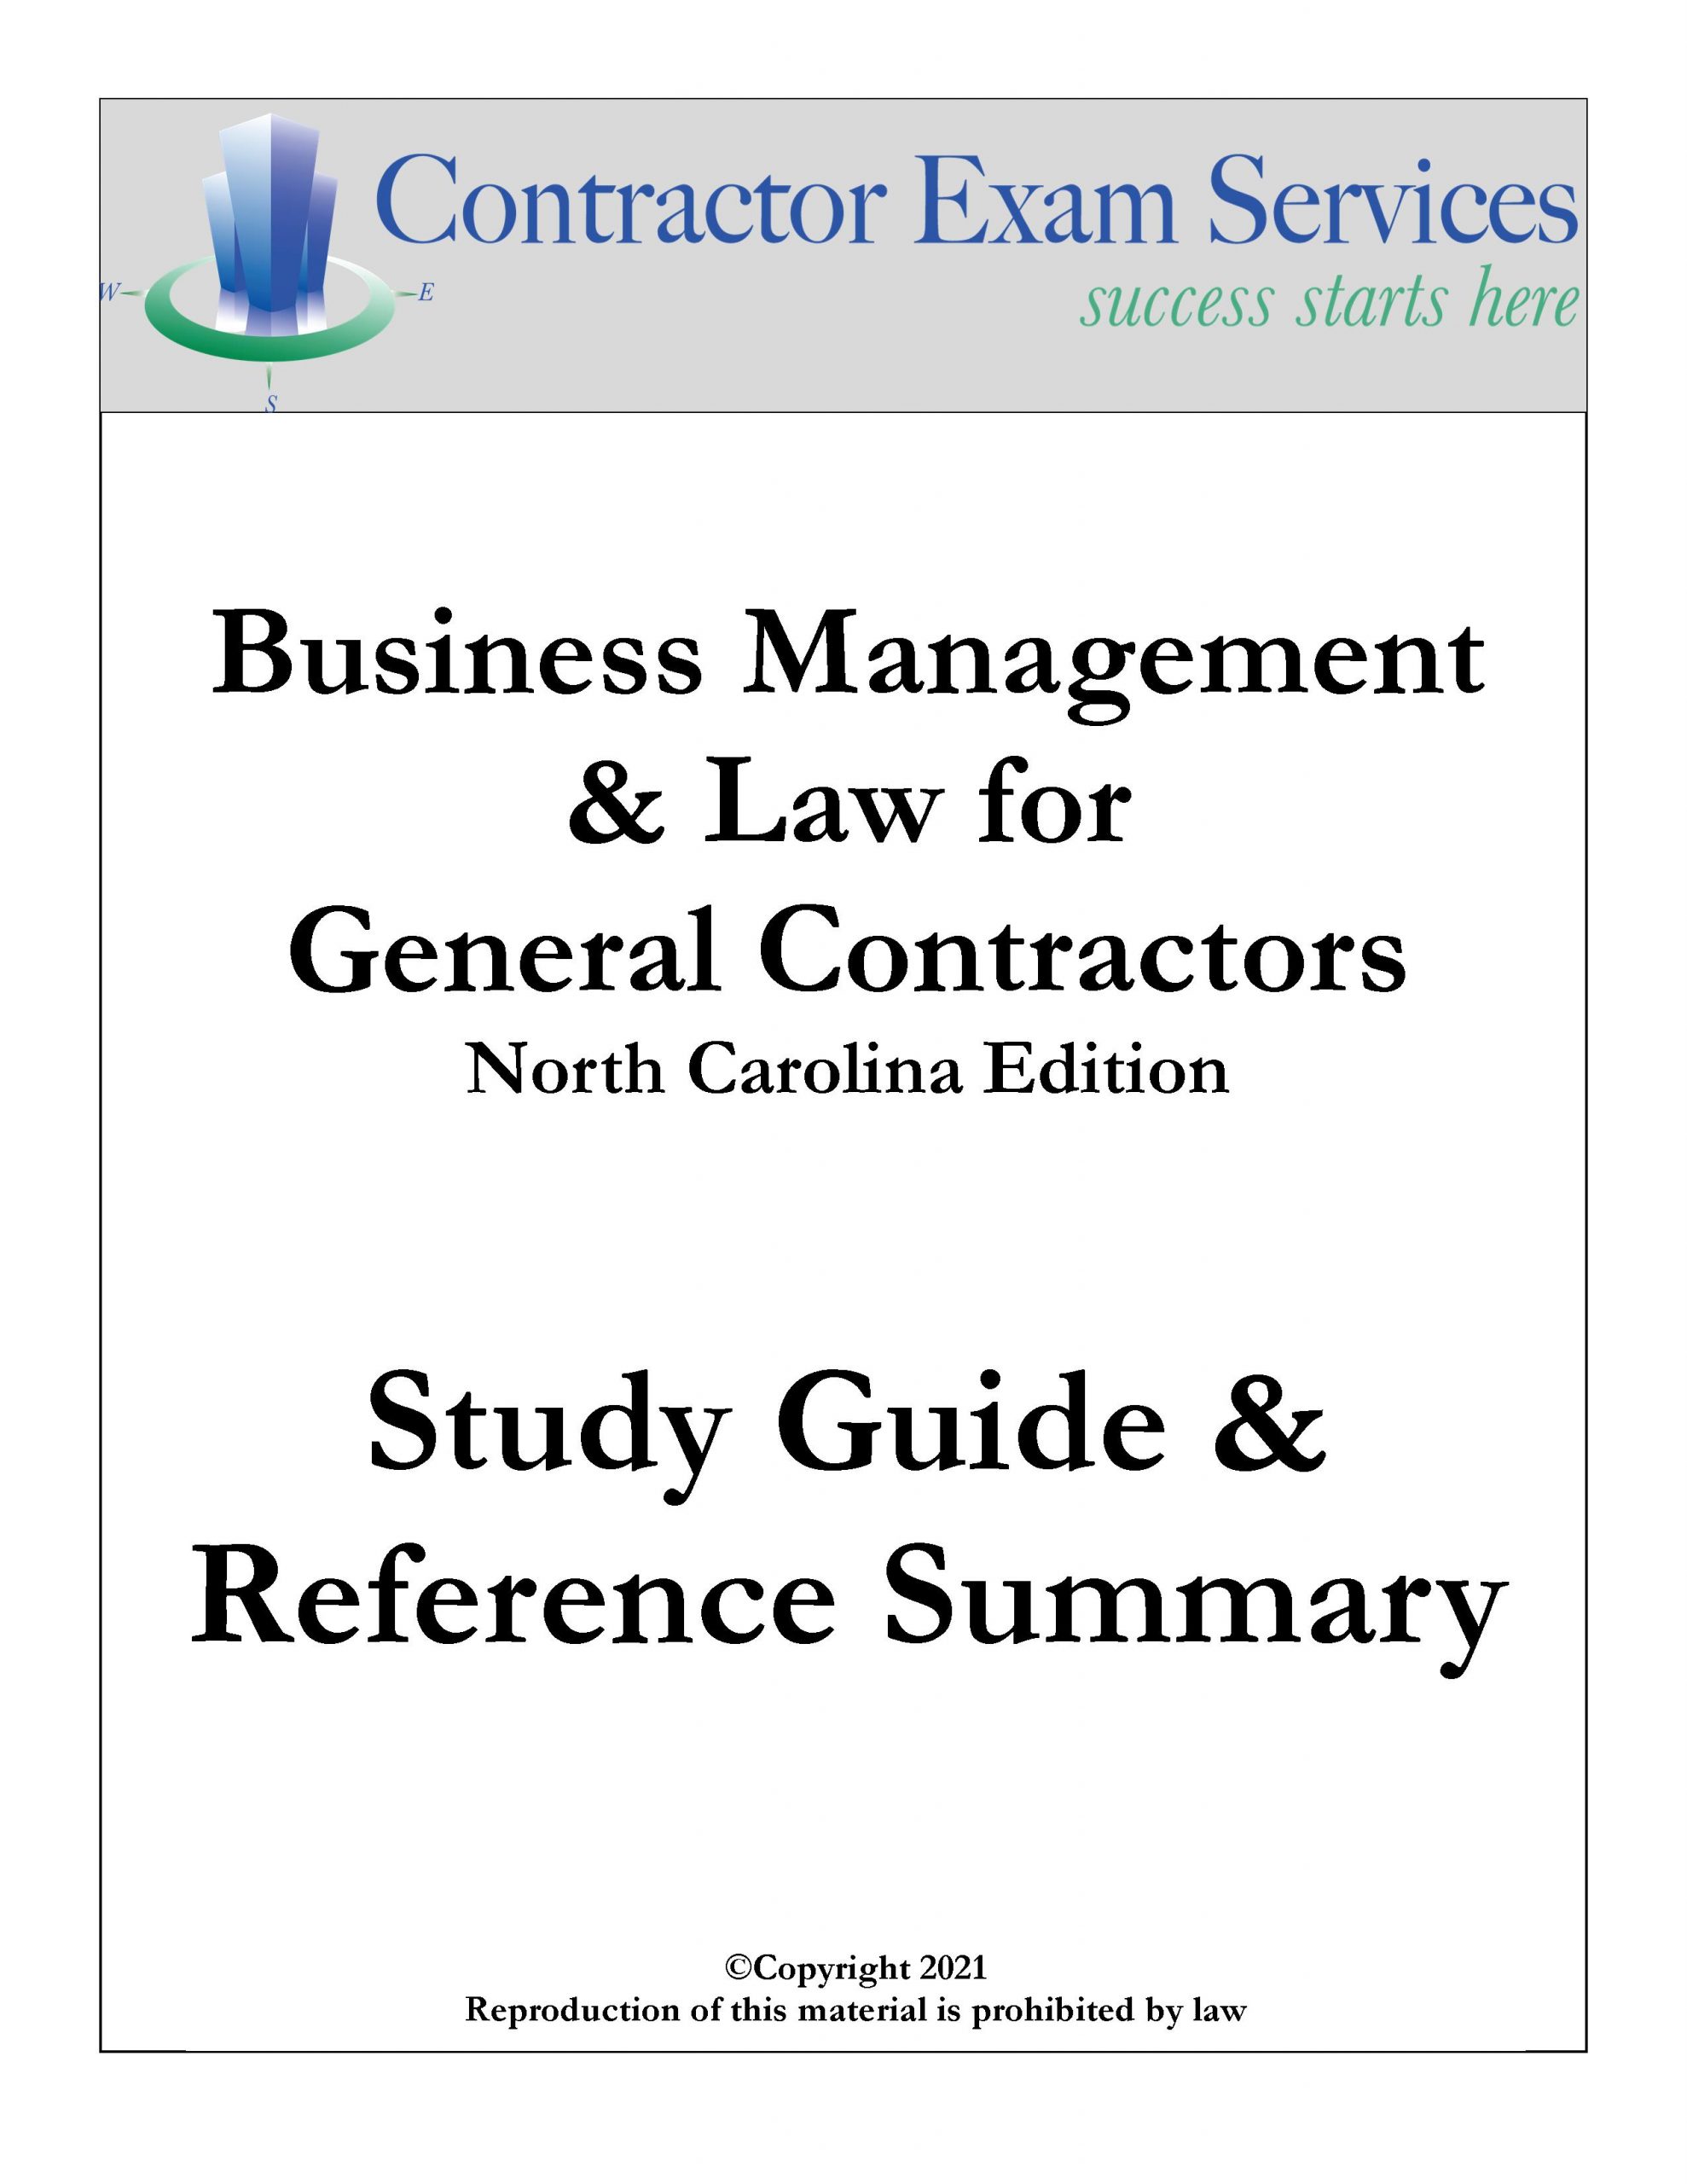 NC Business Management & Law for Contractors Study Guide